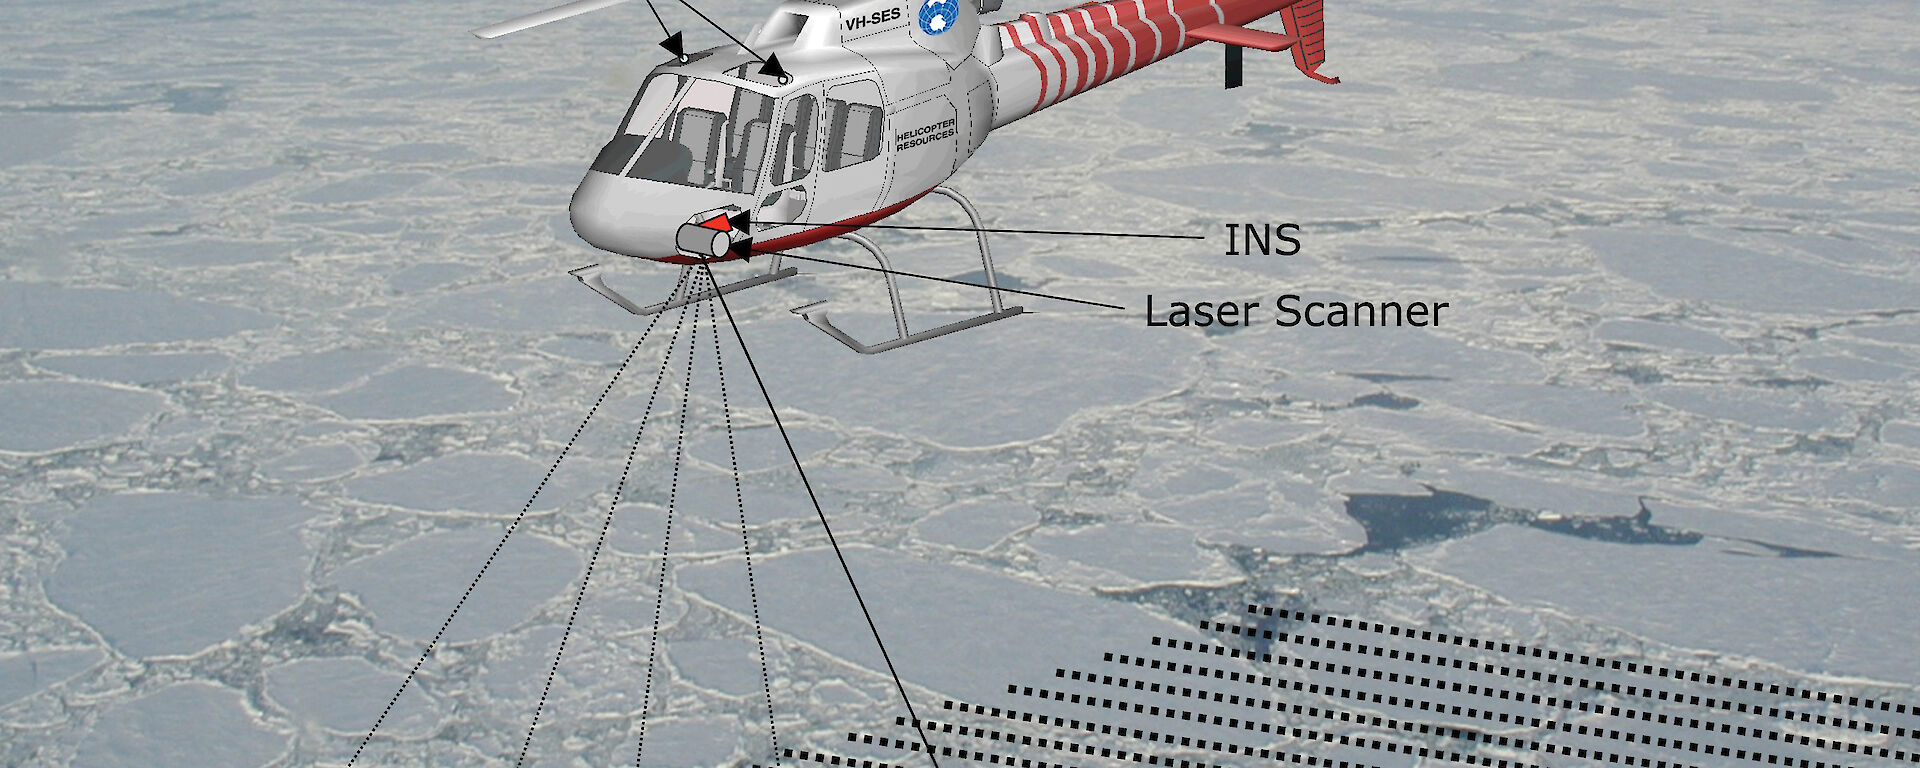 Graphic of the helicopter-borne laser scanner, which produces an across-track scanning pattern of the ice surface, to determine surface roughness and elevation.